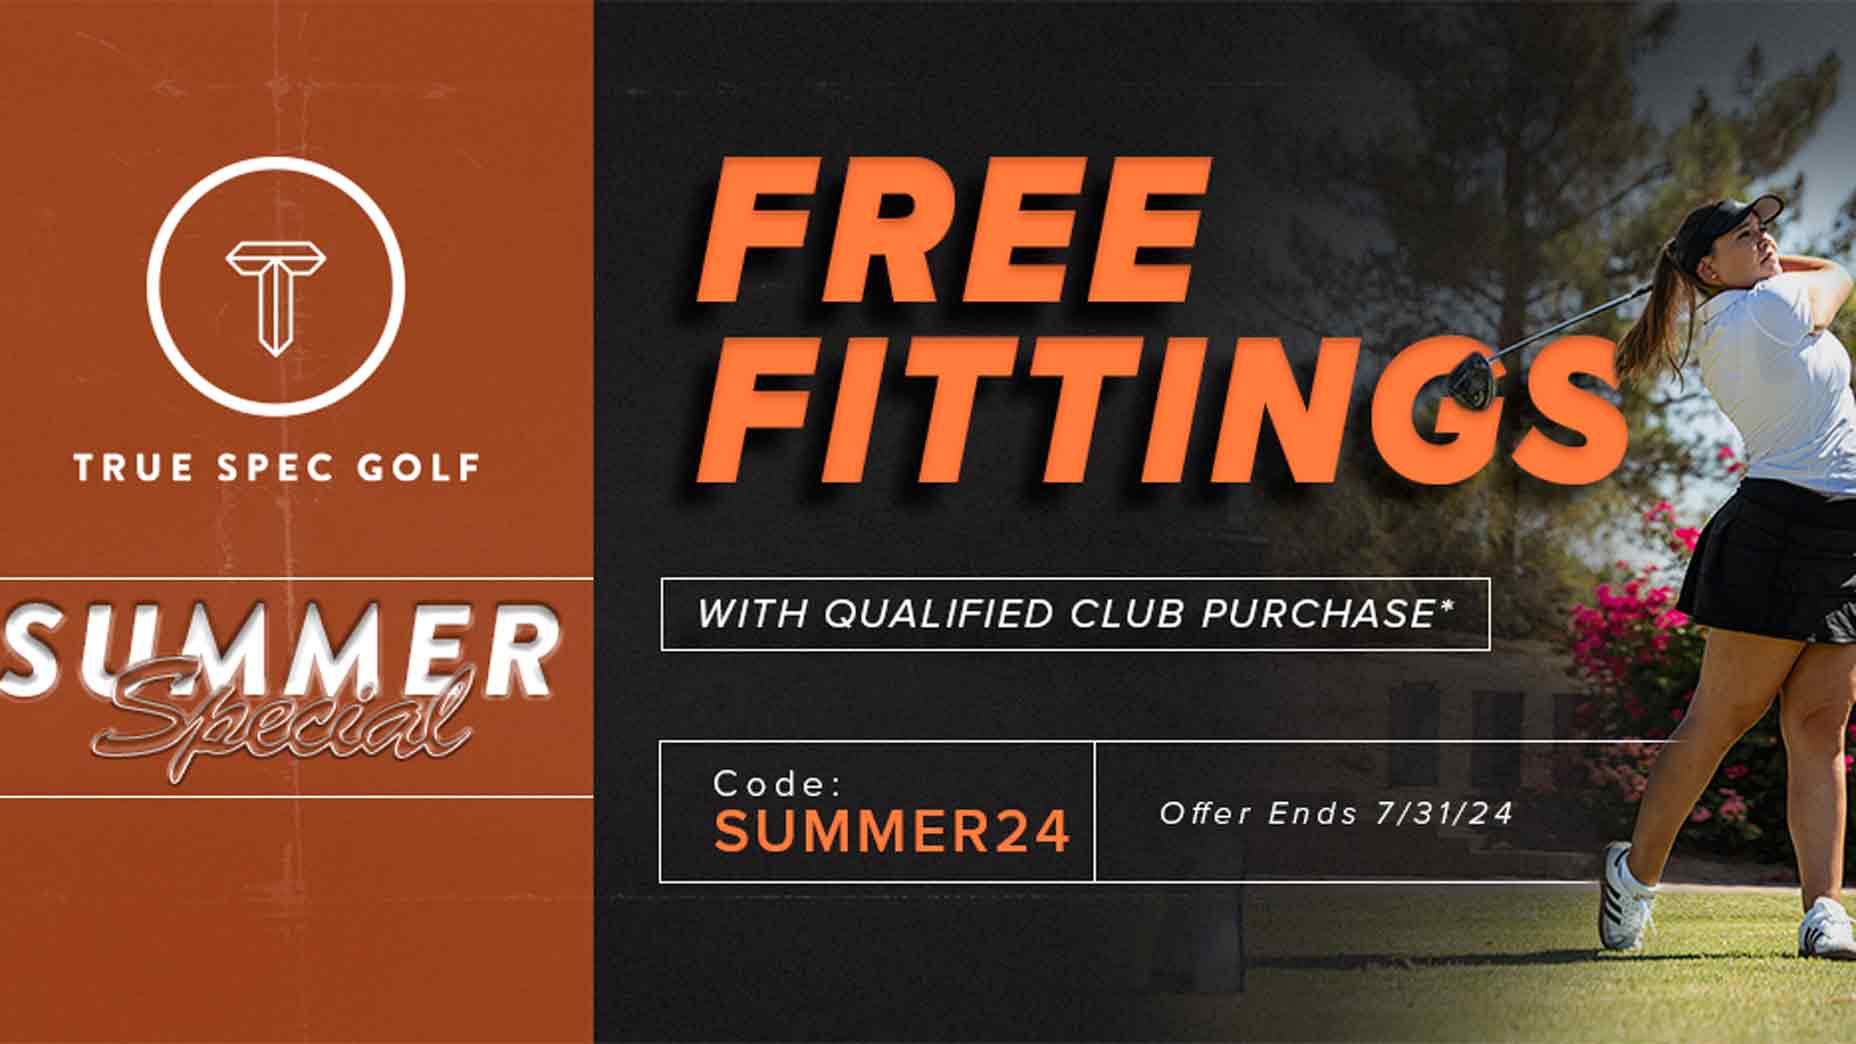 With summer heating up, True Spec Golf's bringing the fire by offering free fittings for all of July. Here's what to know about the deal